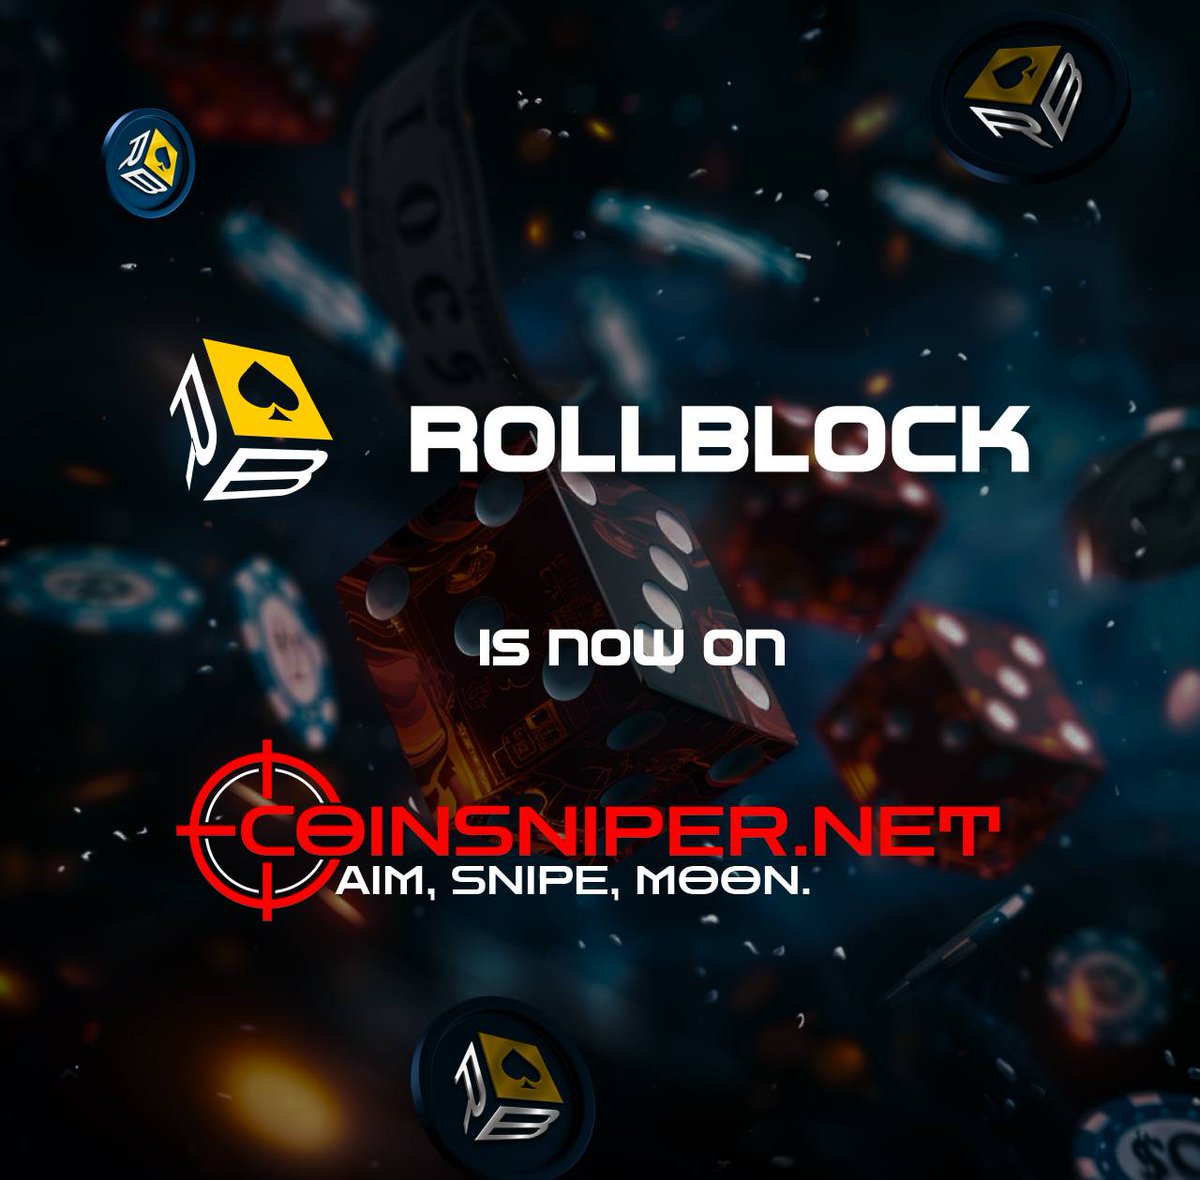 🎯 Attention all you sharp-shooters and high-rollers out there! Rollblock is taking aim at the competition and hitting the bullseye with our latest move - we're now on @coinsniper_net ! 🎉